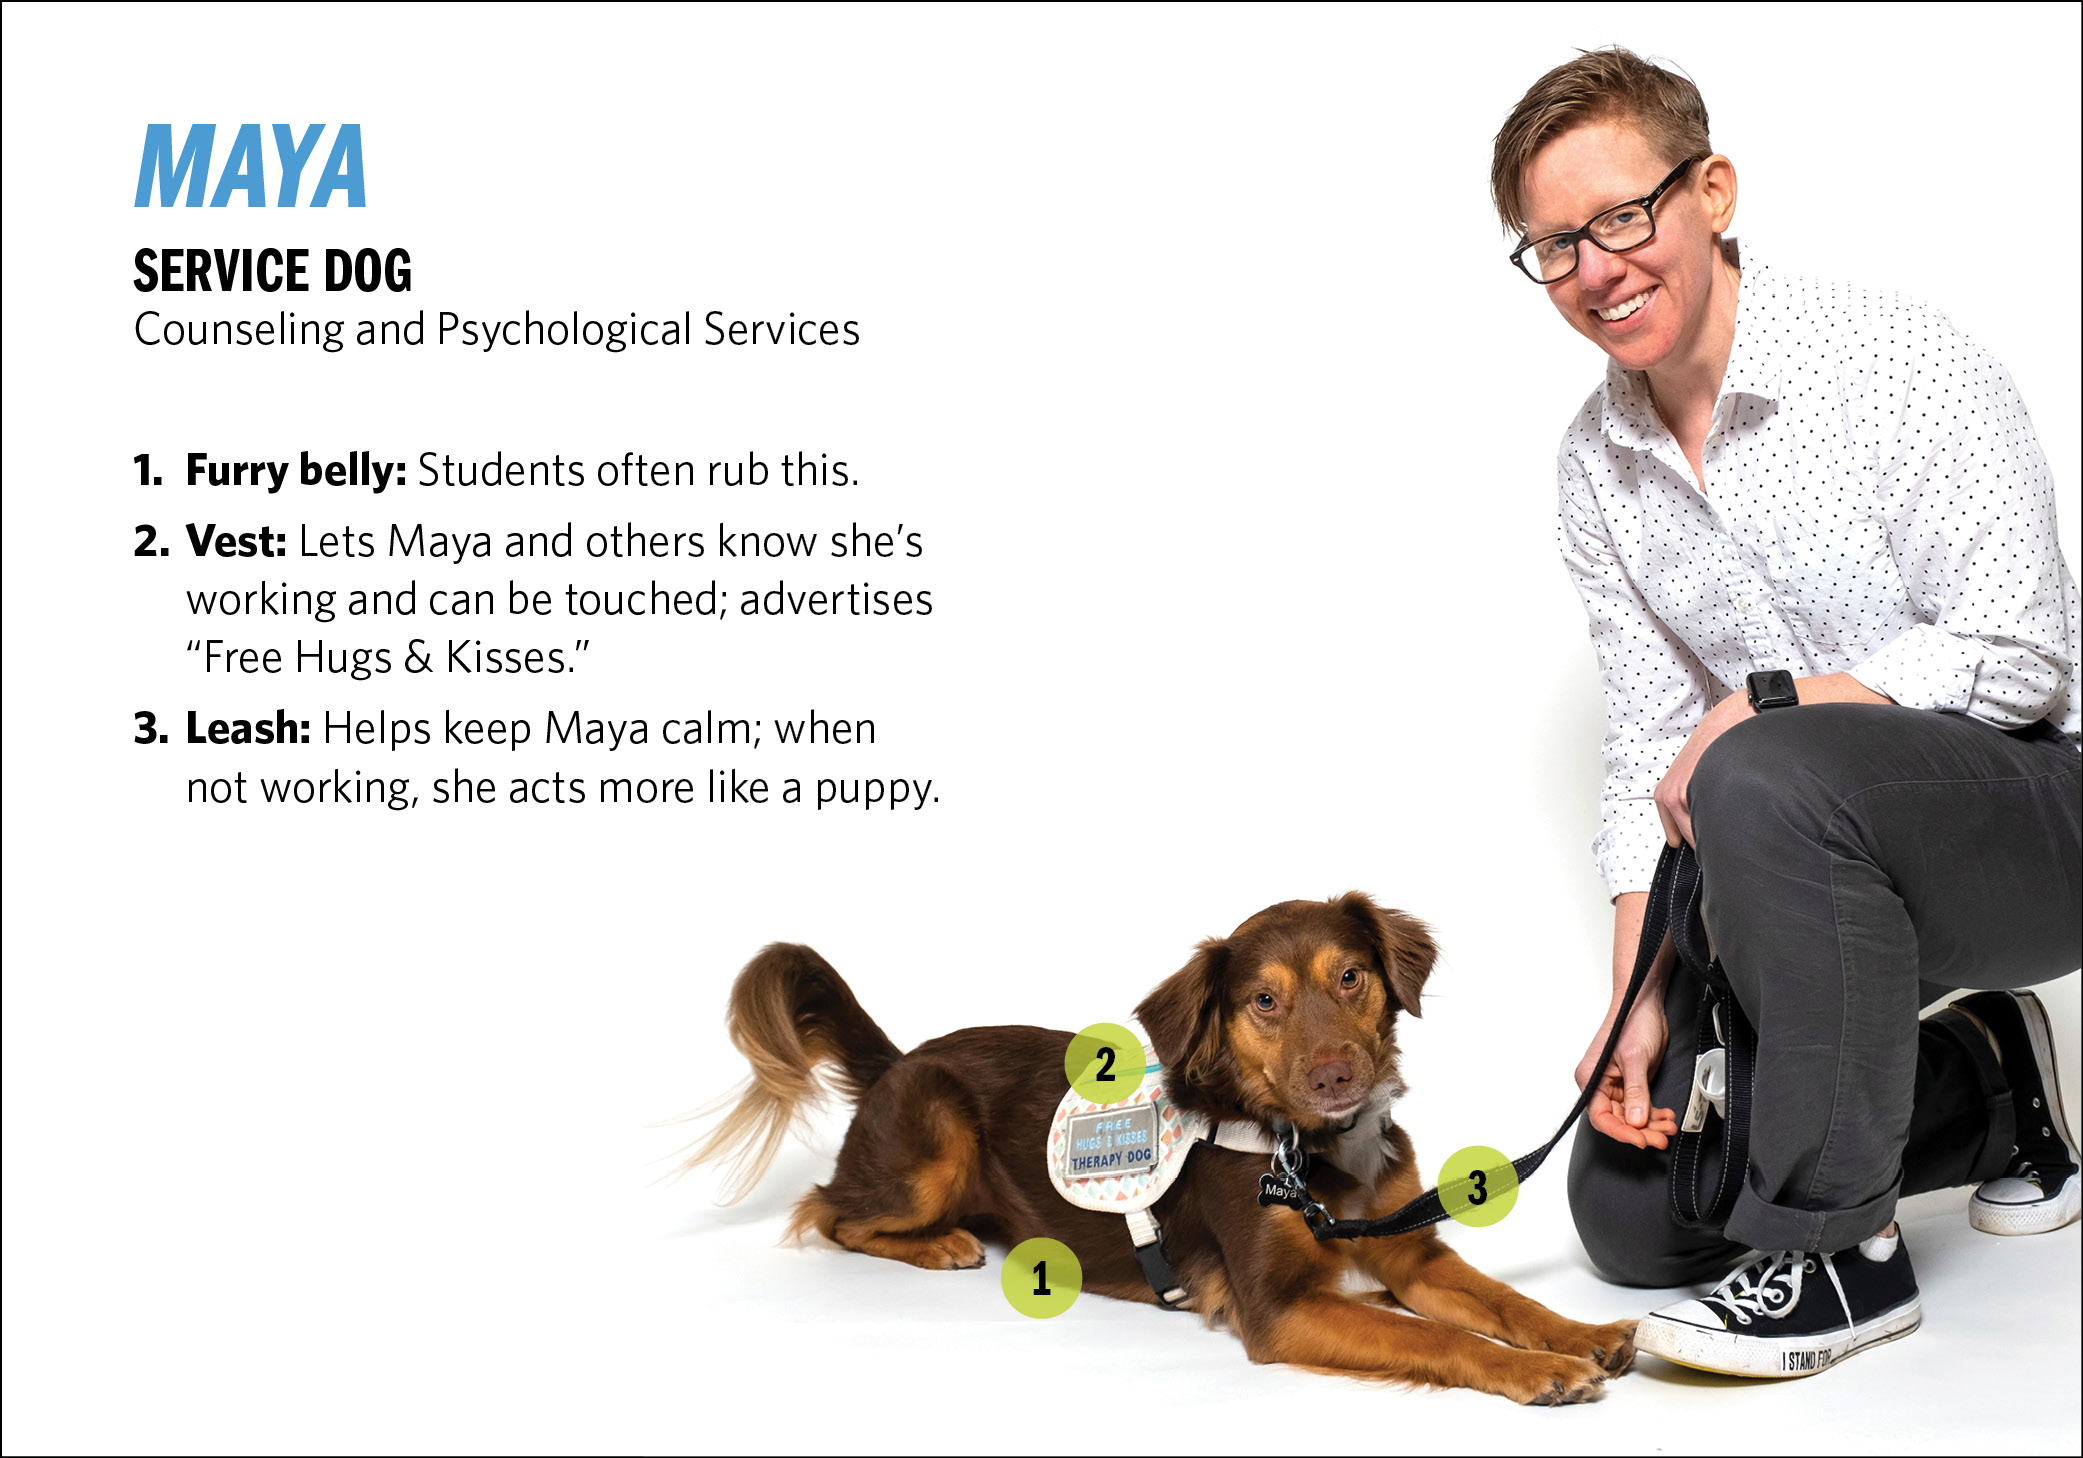 Service dog Maya and Avery Cook, associate director, Counseling and Psychological Services. Furry belly that students rub, vest that advertises “Free Hugs & Kisses,” leash.